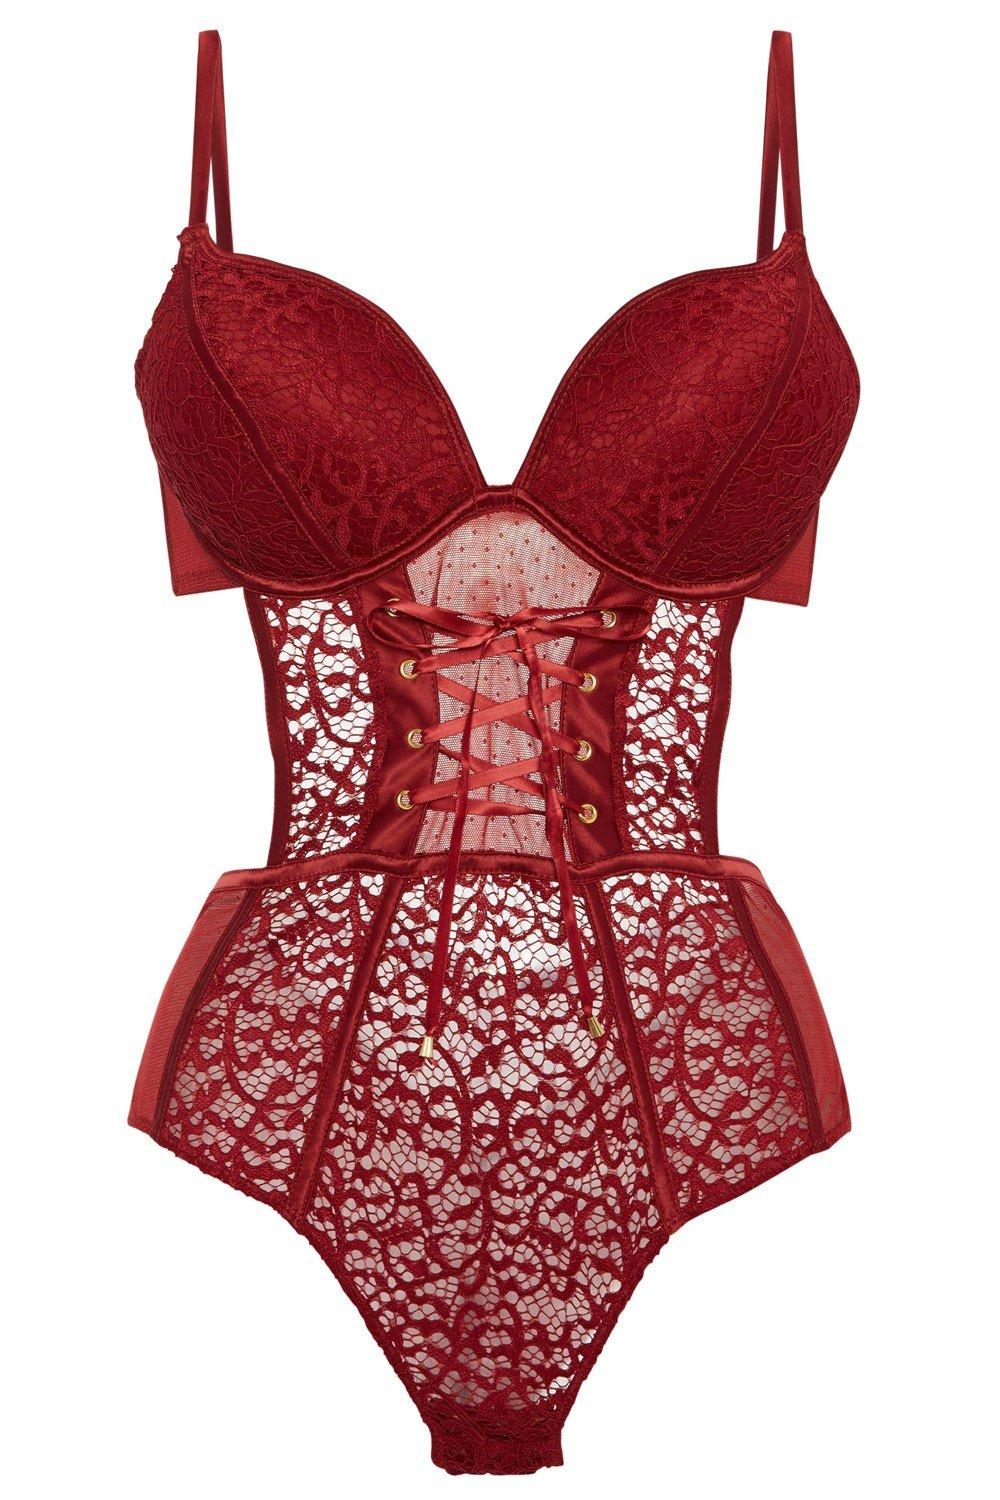 I work in Primark - shoppers are obsessed with our Valentine's corset and  it's £57 cheaper than Victoria's Secret